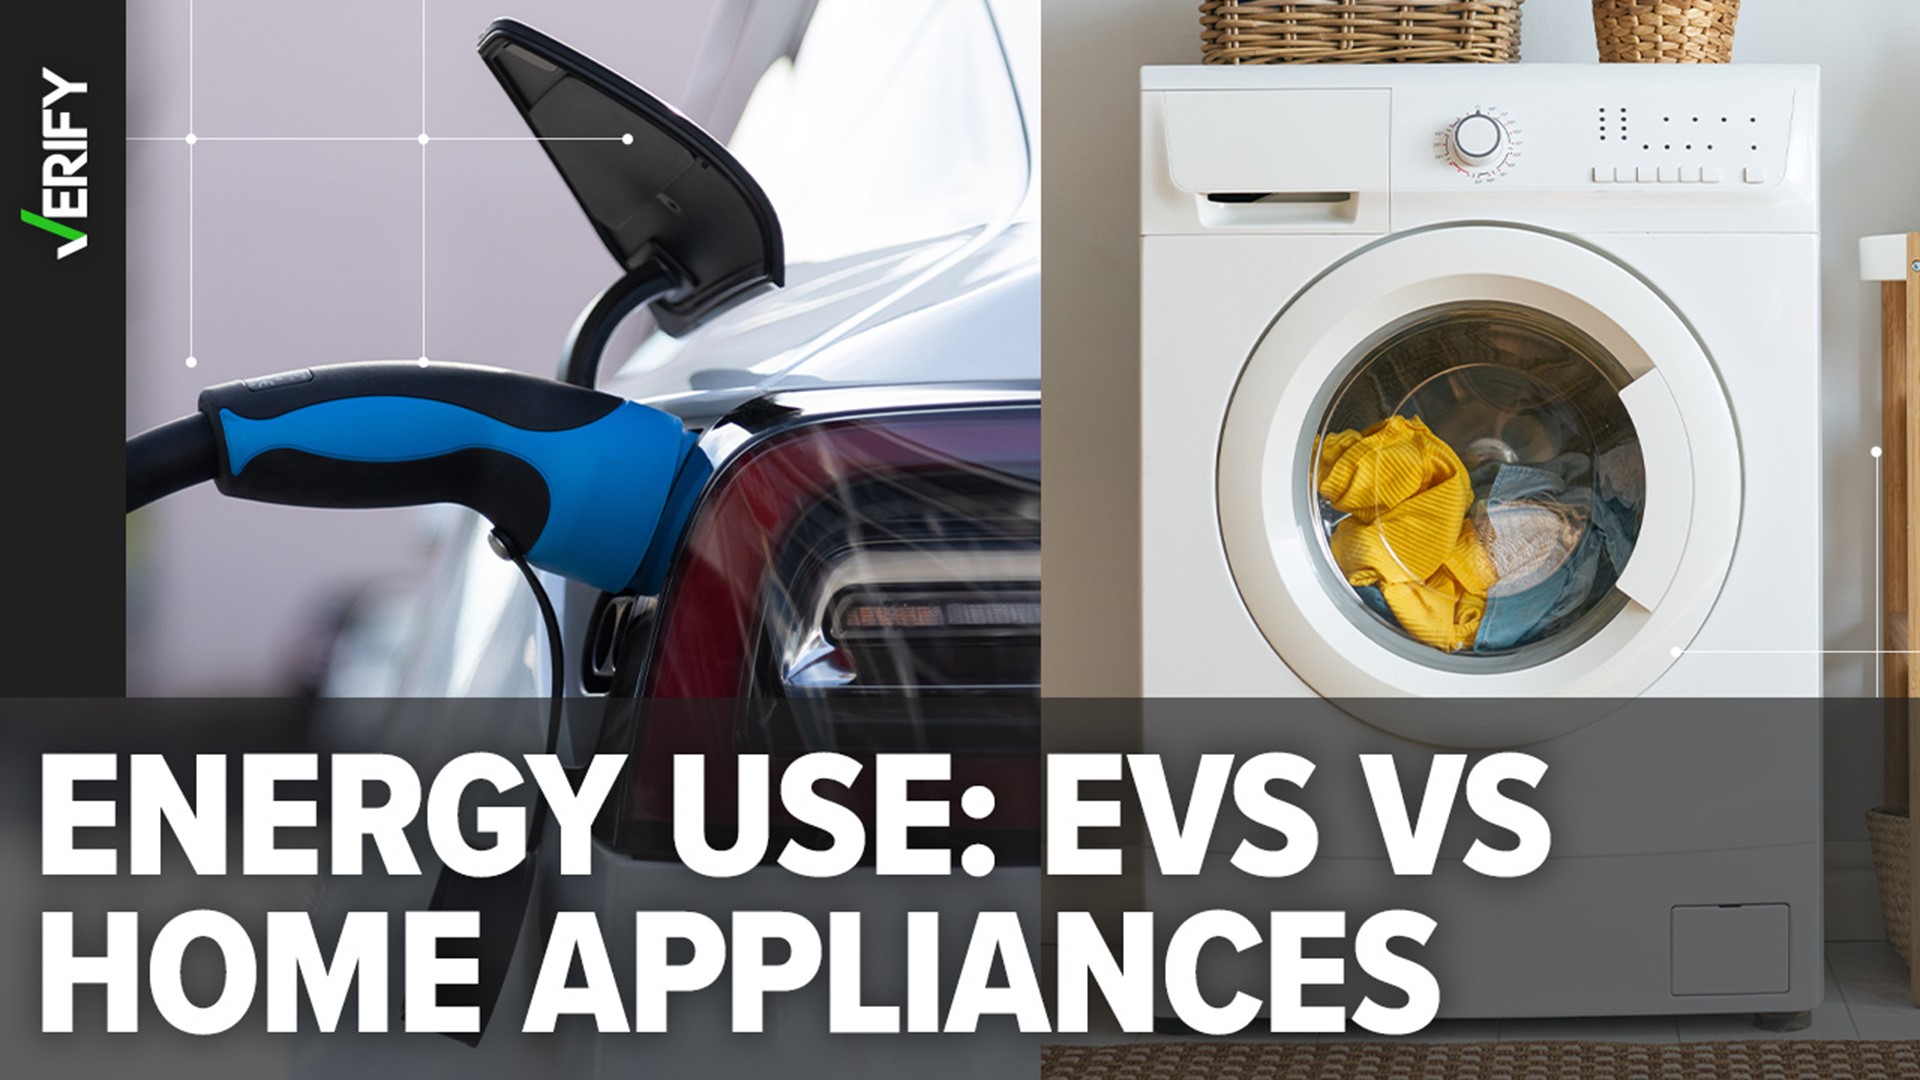 The most popular electric vehicles can use about as much electricity as some home appliances. Here’s how appliances and EVs compare.